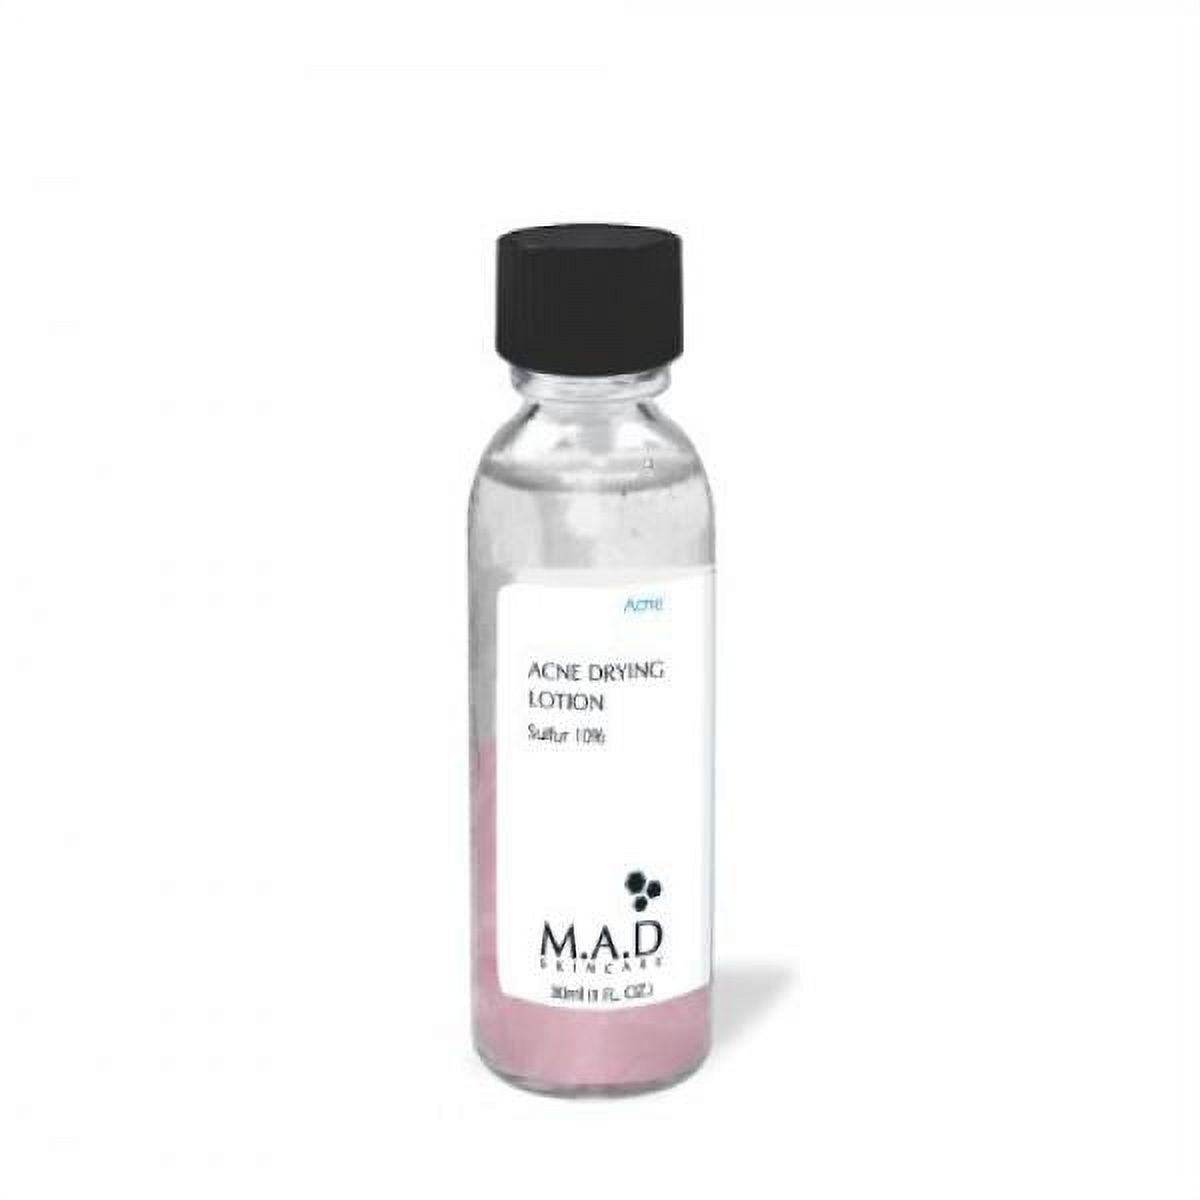 M.A.D Skincare Acne Drying Lotion 30ml(1 FL.oz) - image 1 of 7